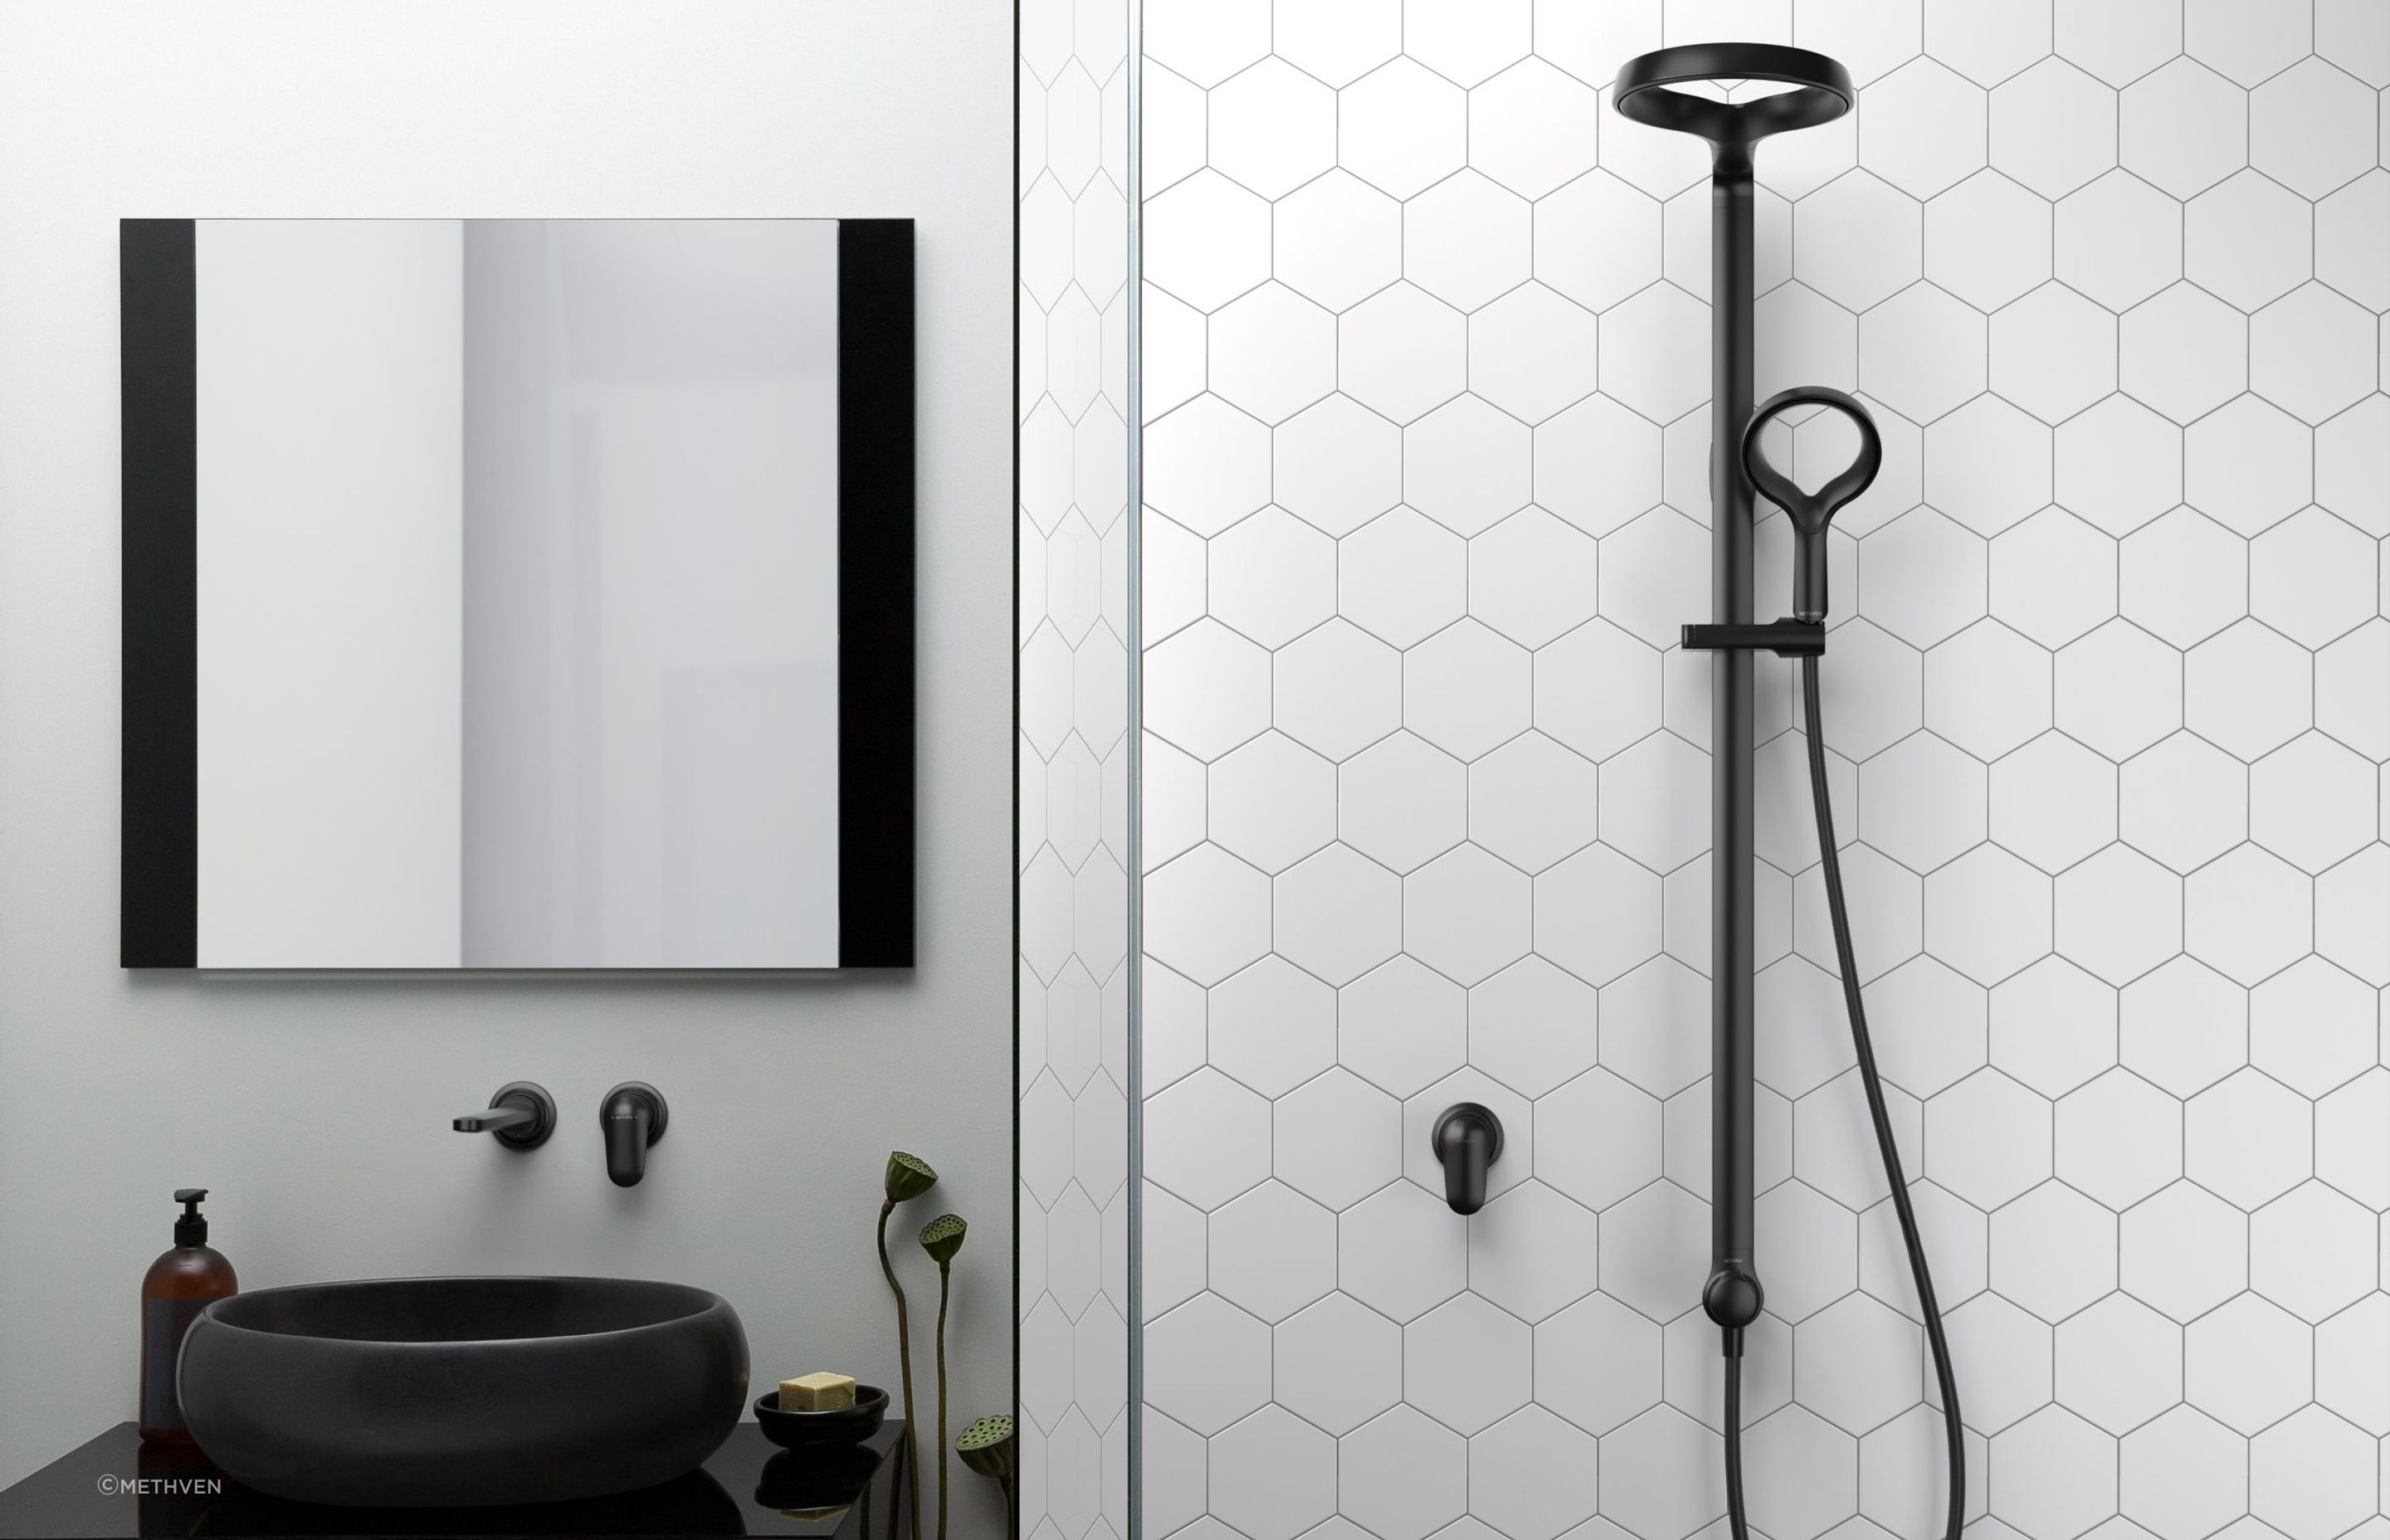 The innovative Aurajet Aio Shower System is packed with features including ultra wide coverage and limescale resistance.